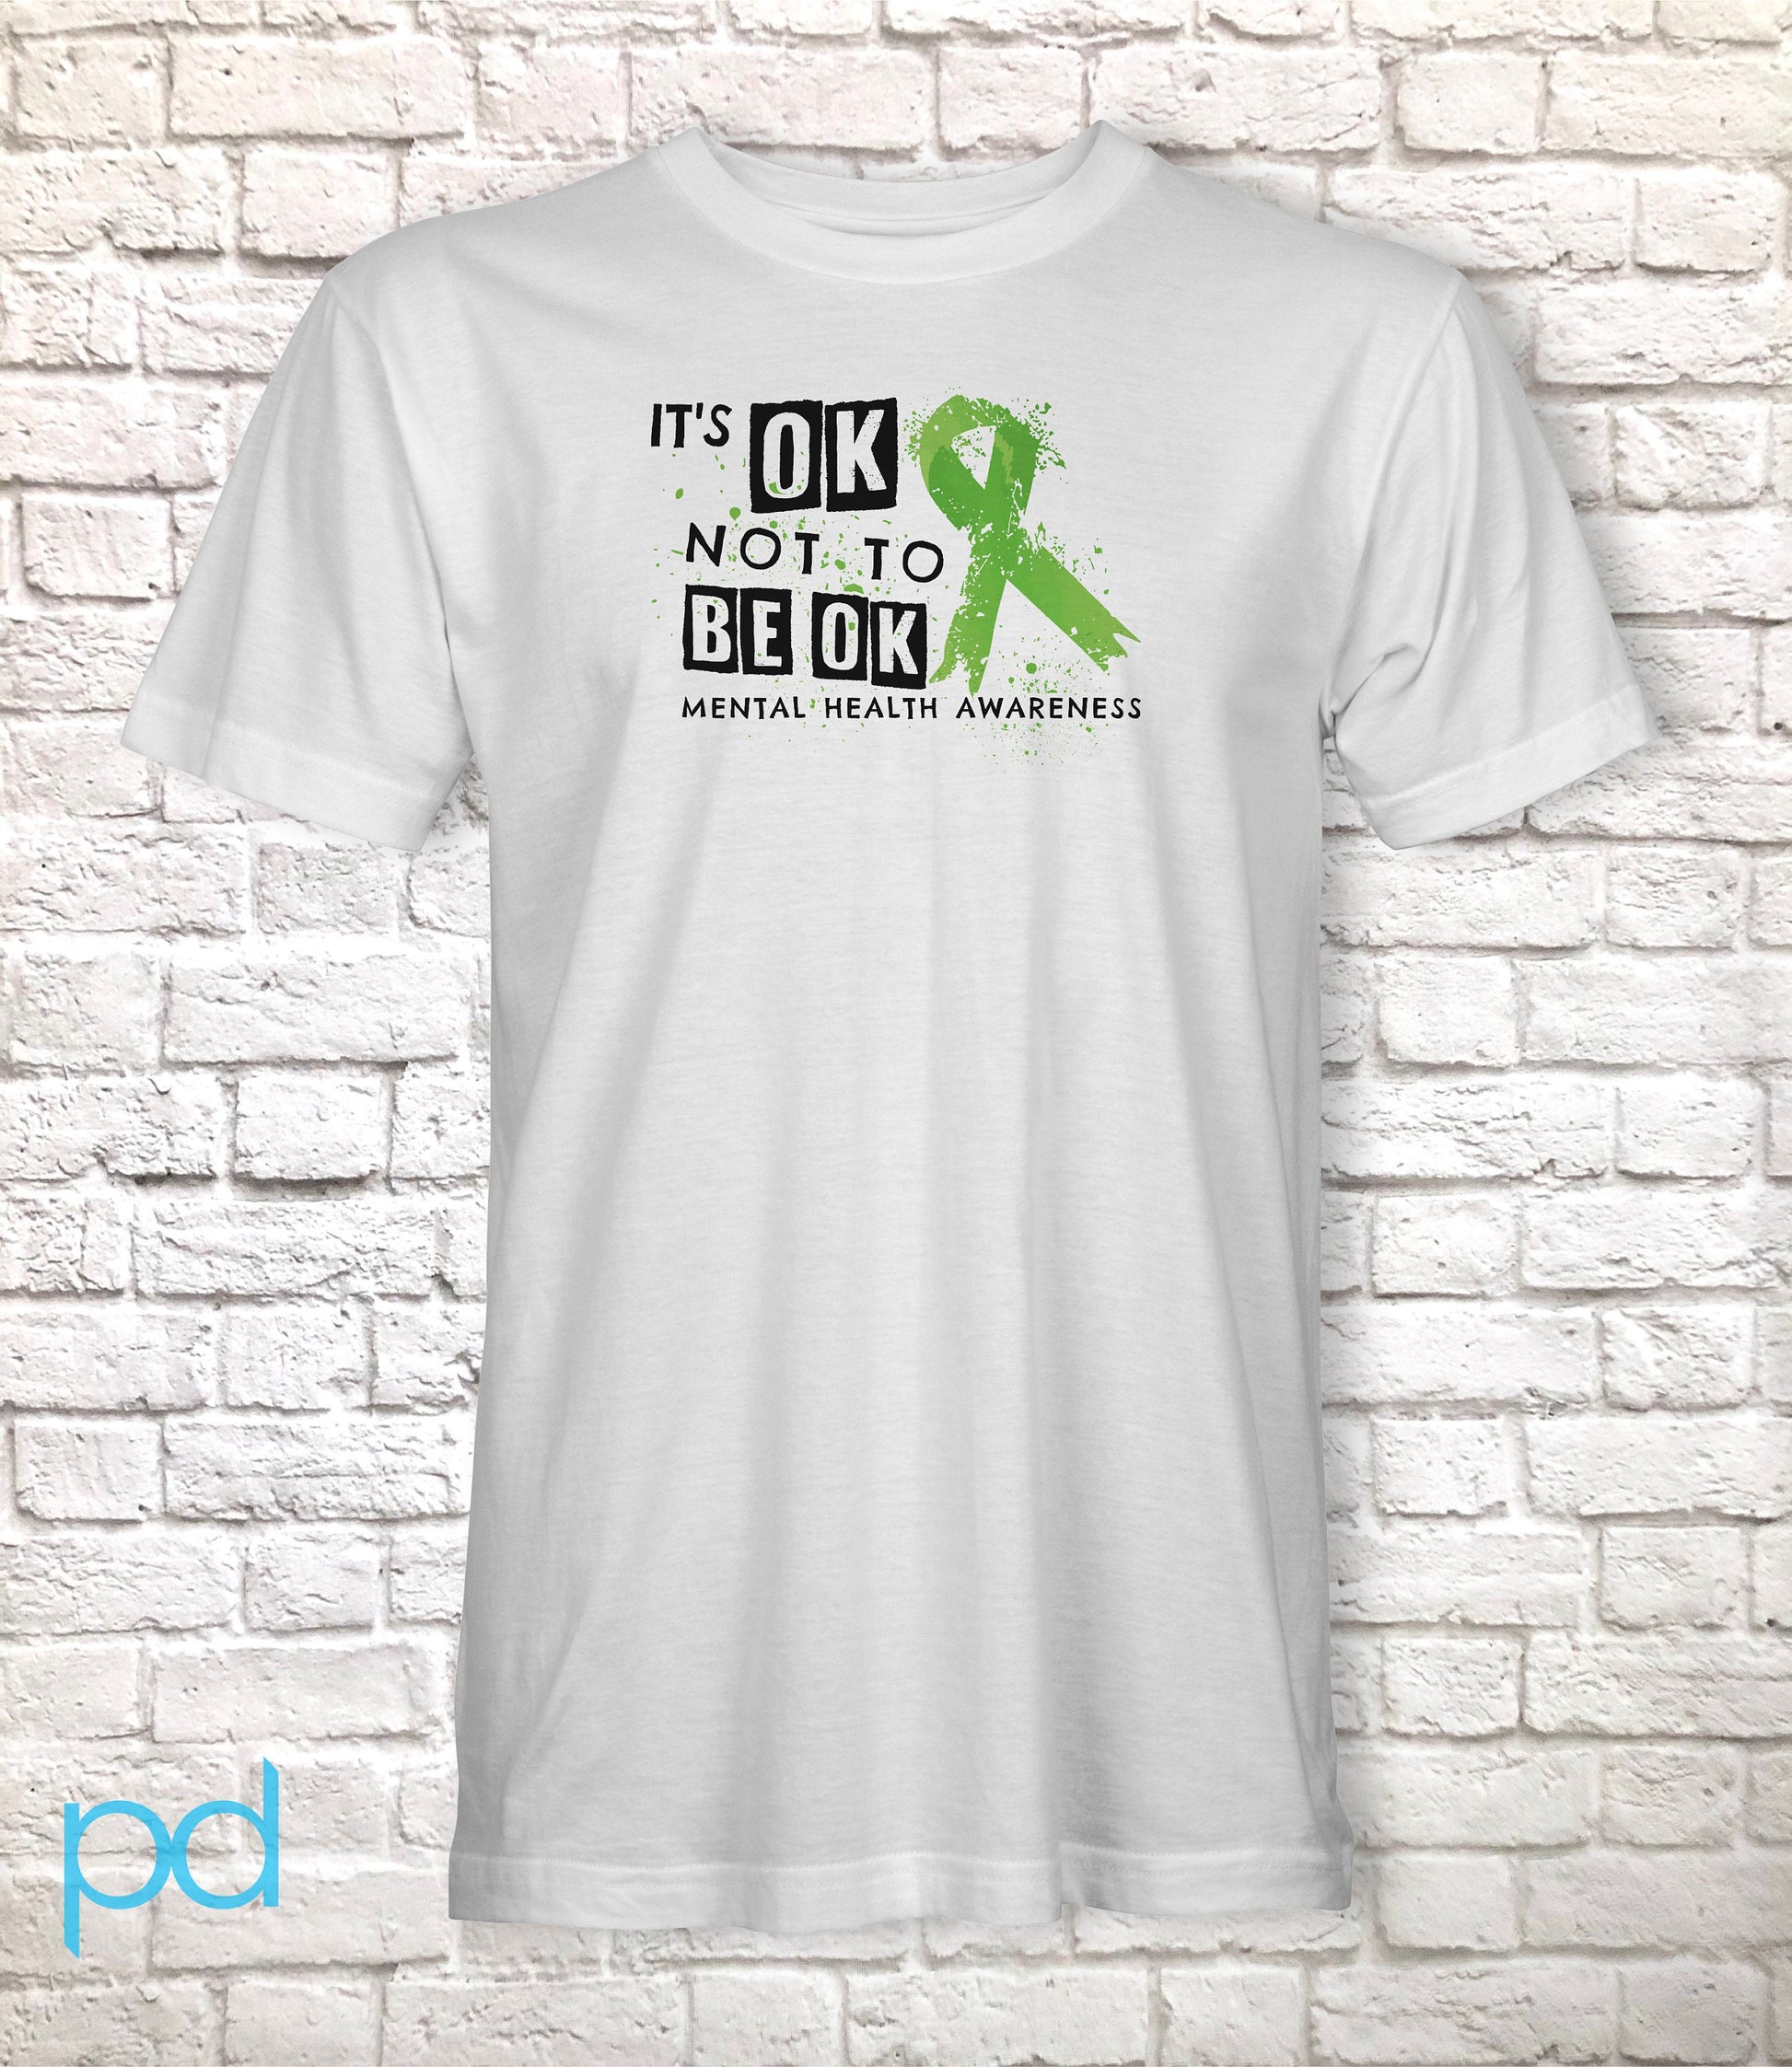 Mental Health Shirt, It's OK Not To Be OK